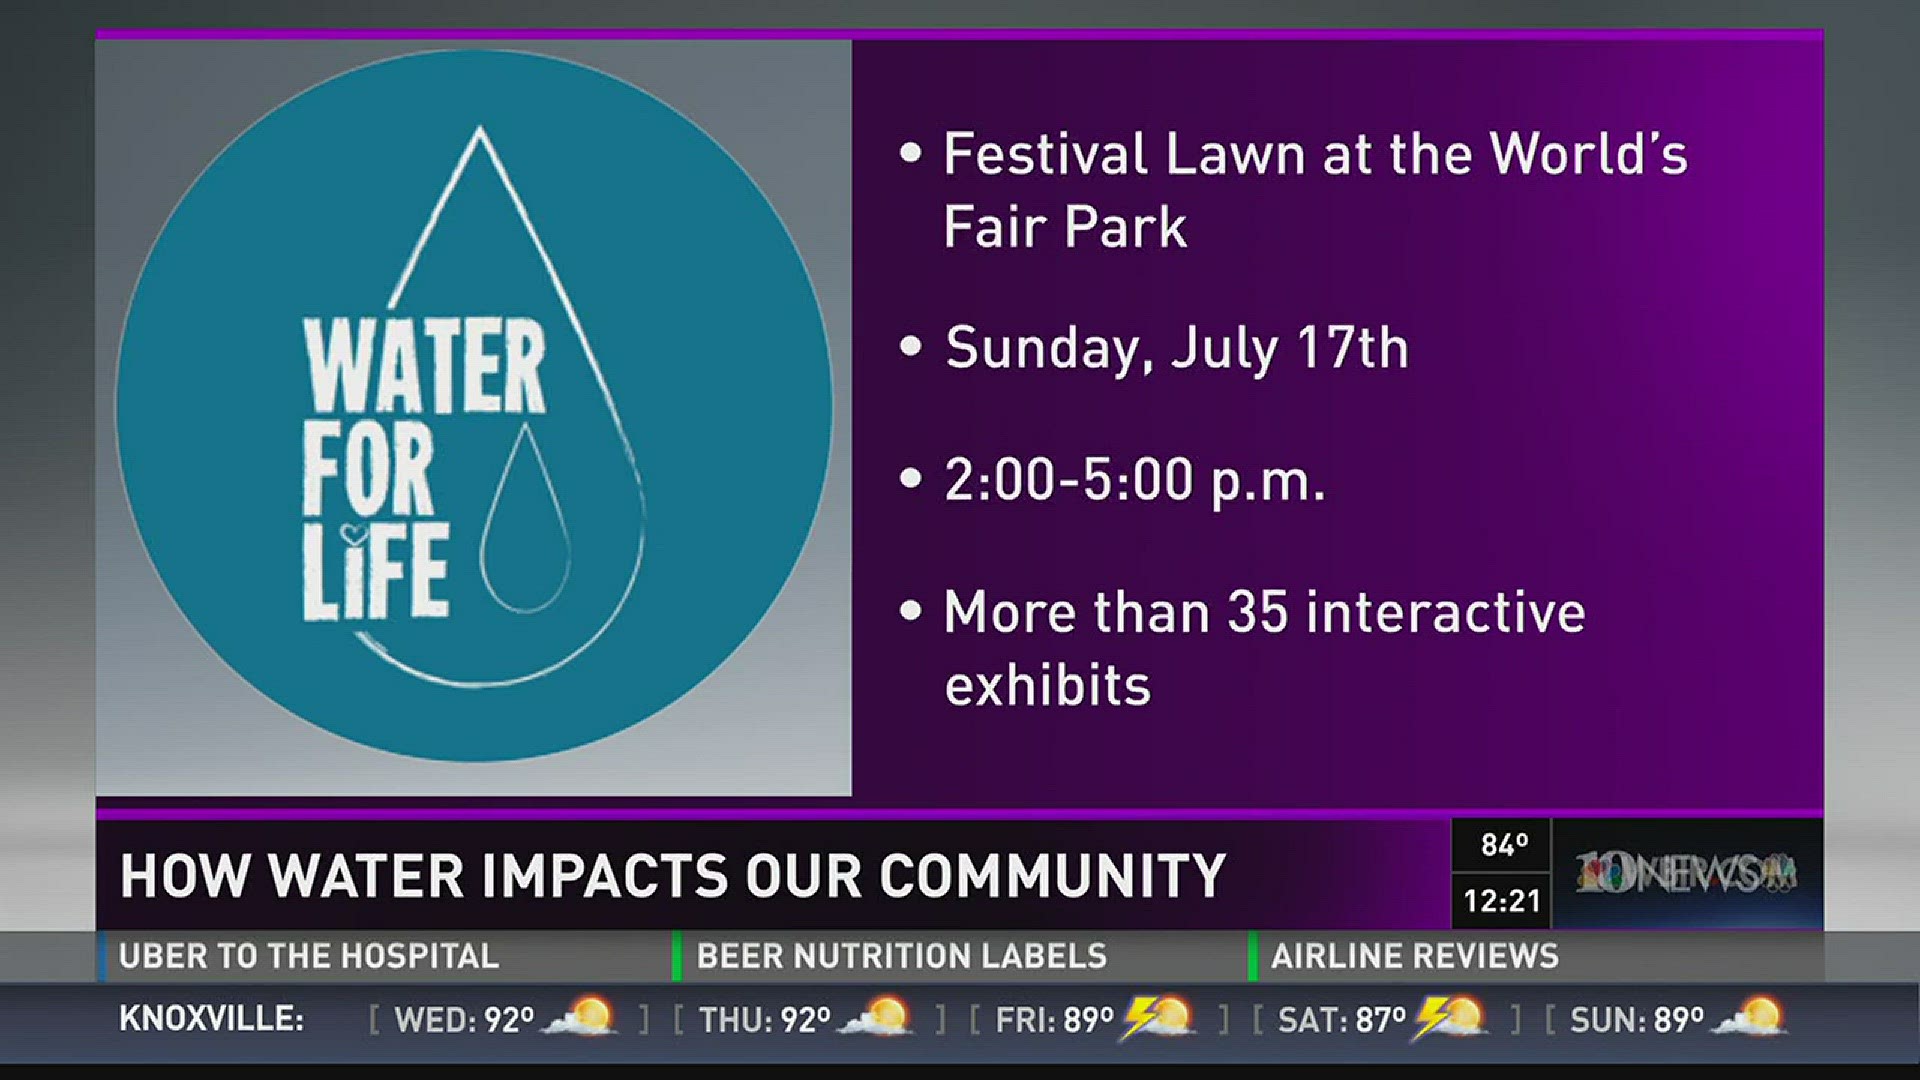 The Water for Life Festival Lawn at World's Fair Park runs from 2-5 p.m. Sunday.